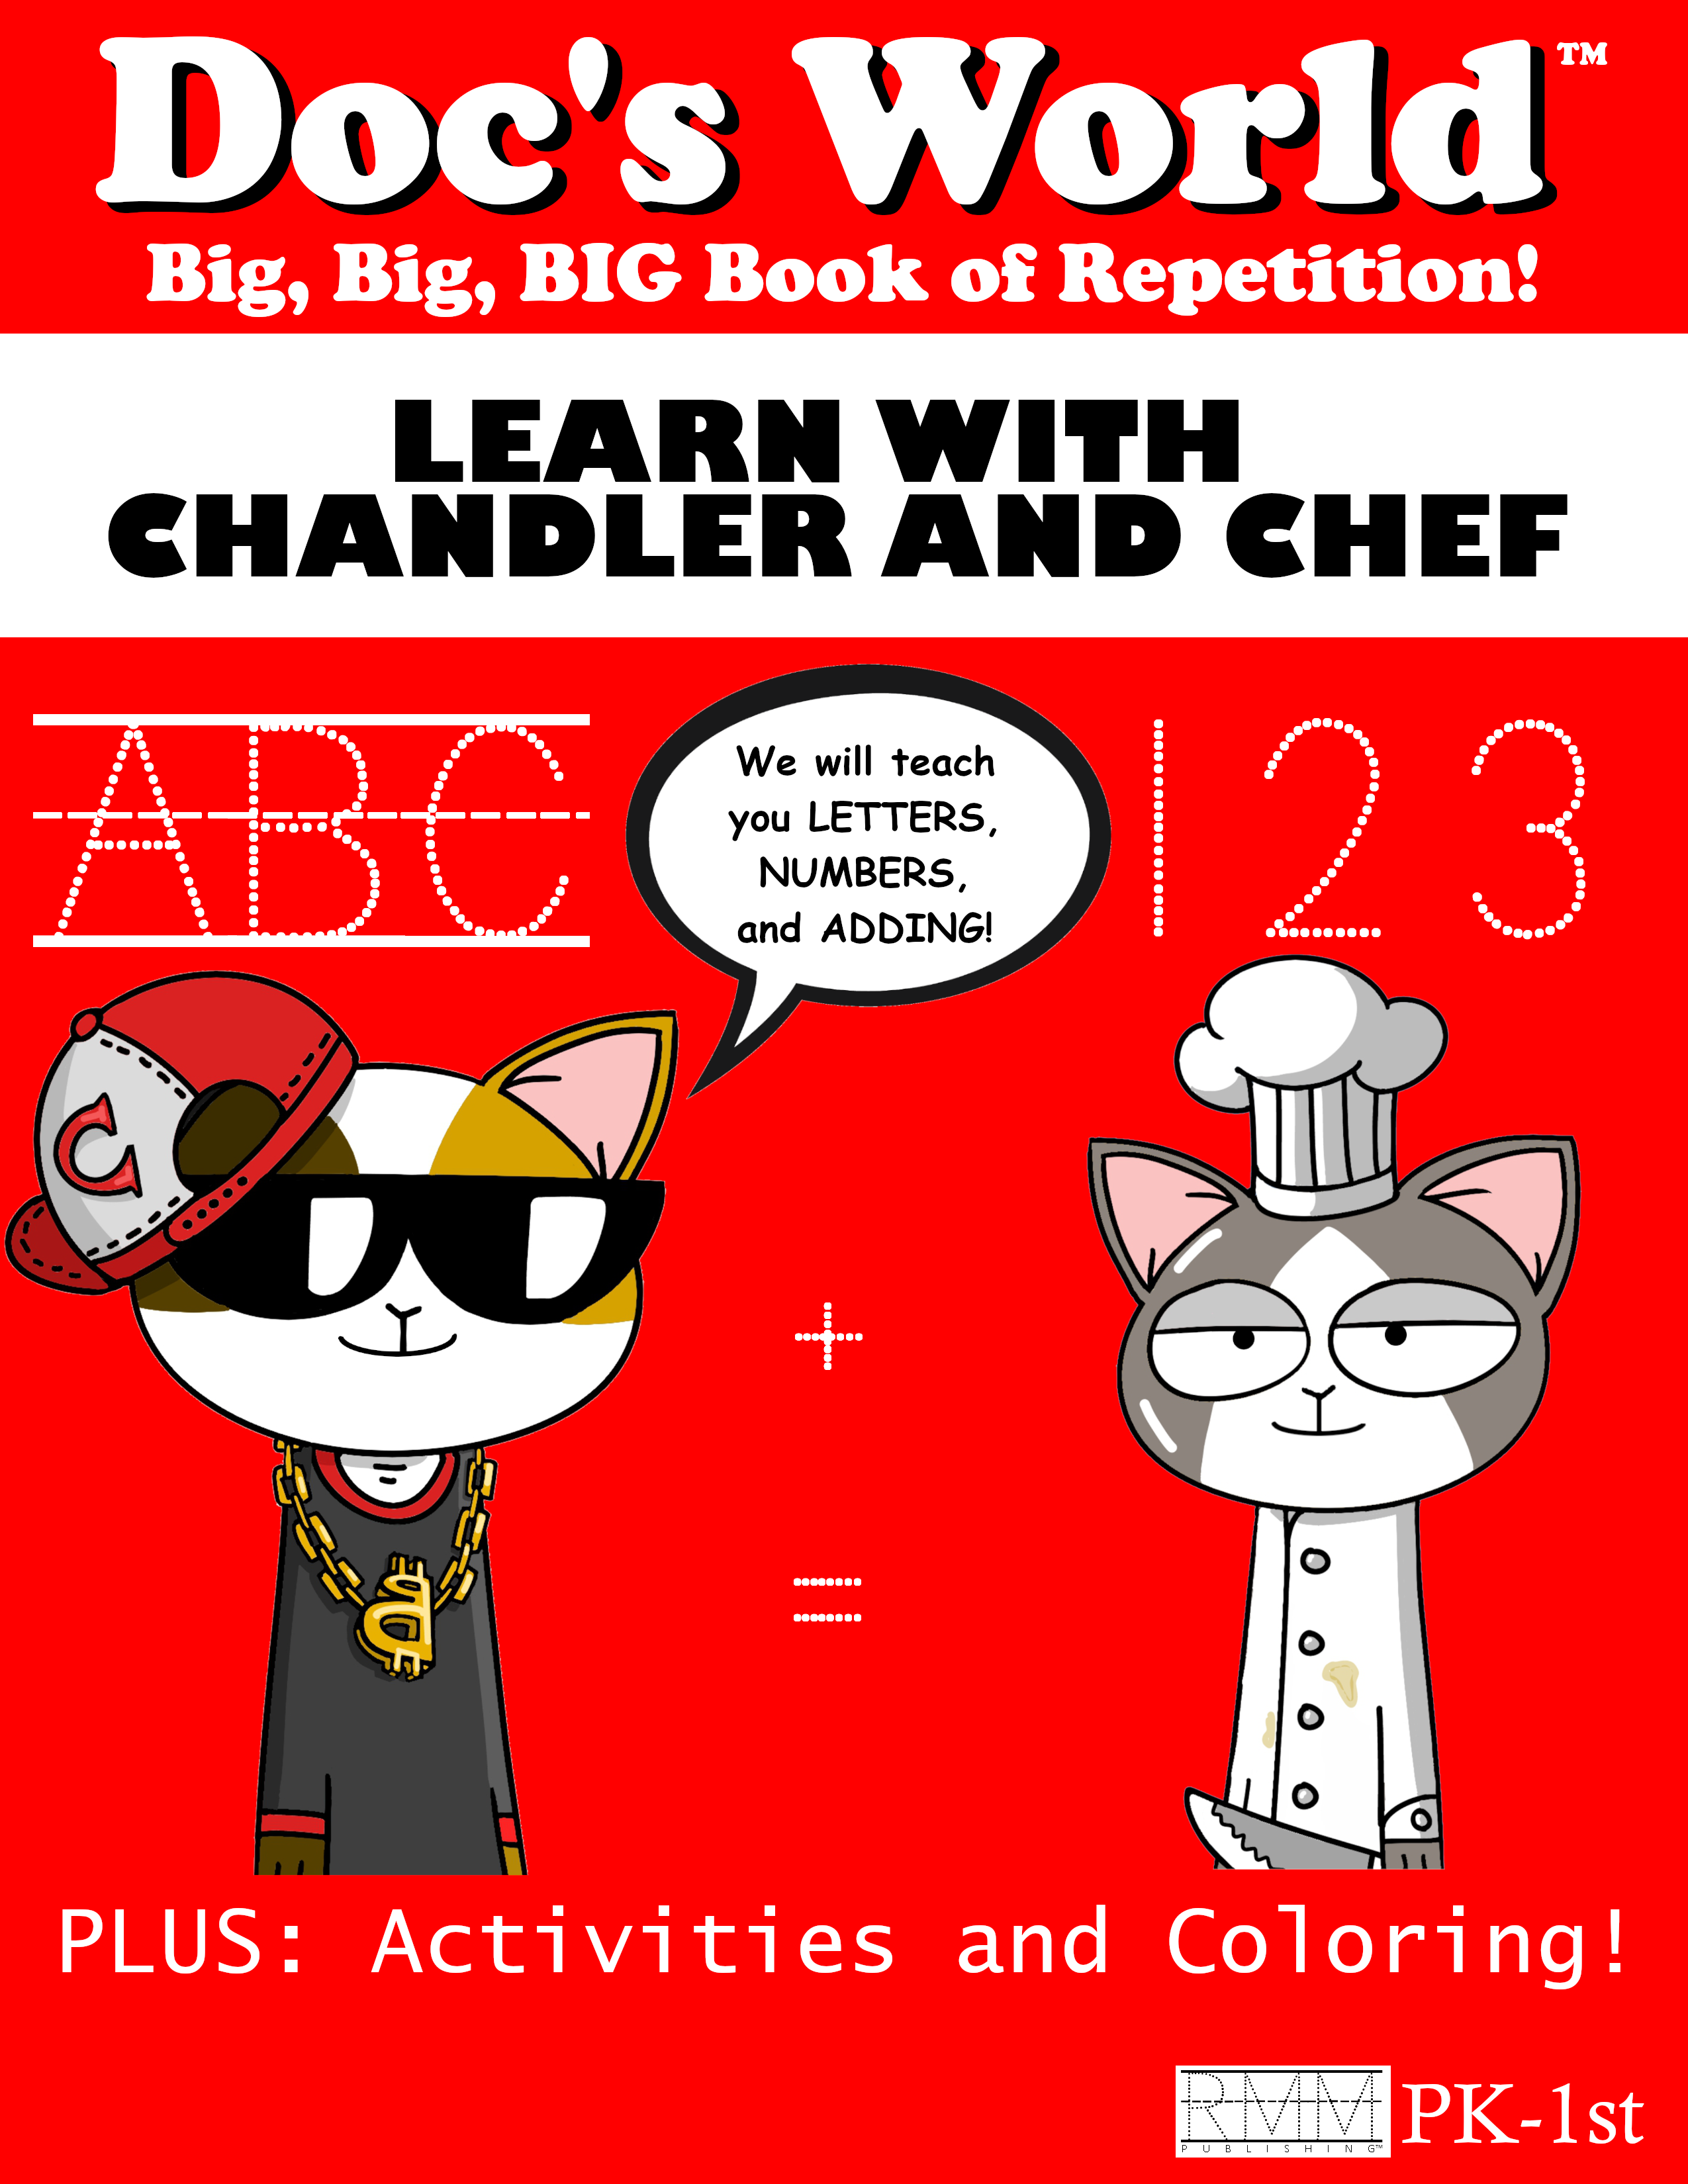 Chandler and Chef Cover 1